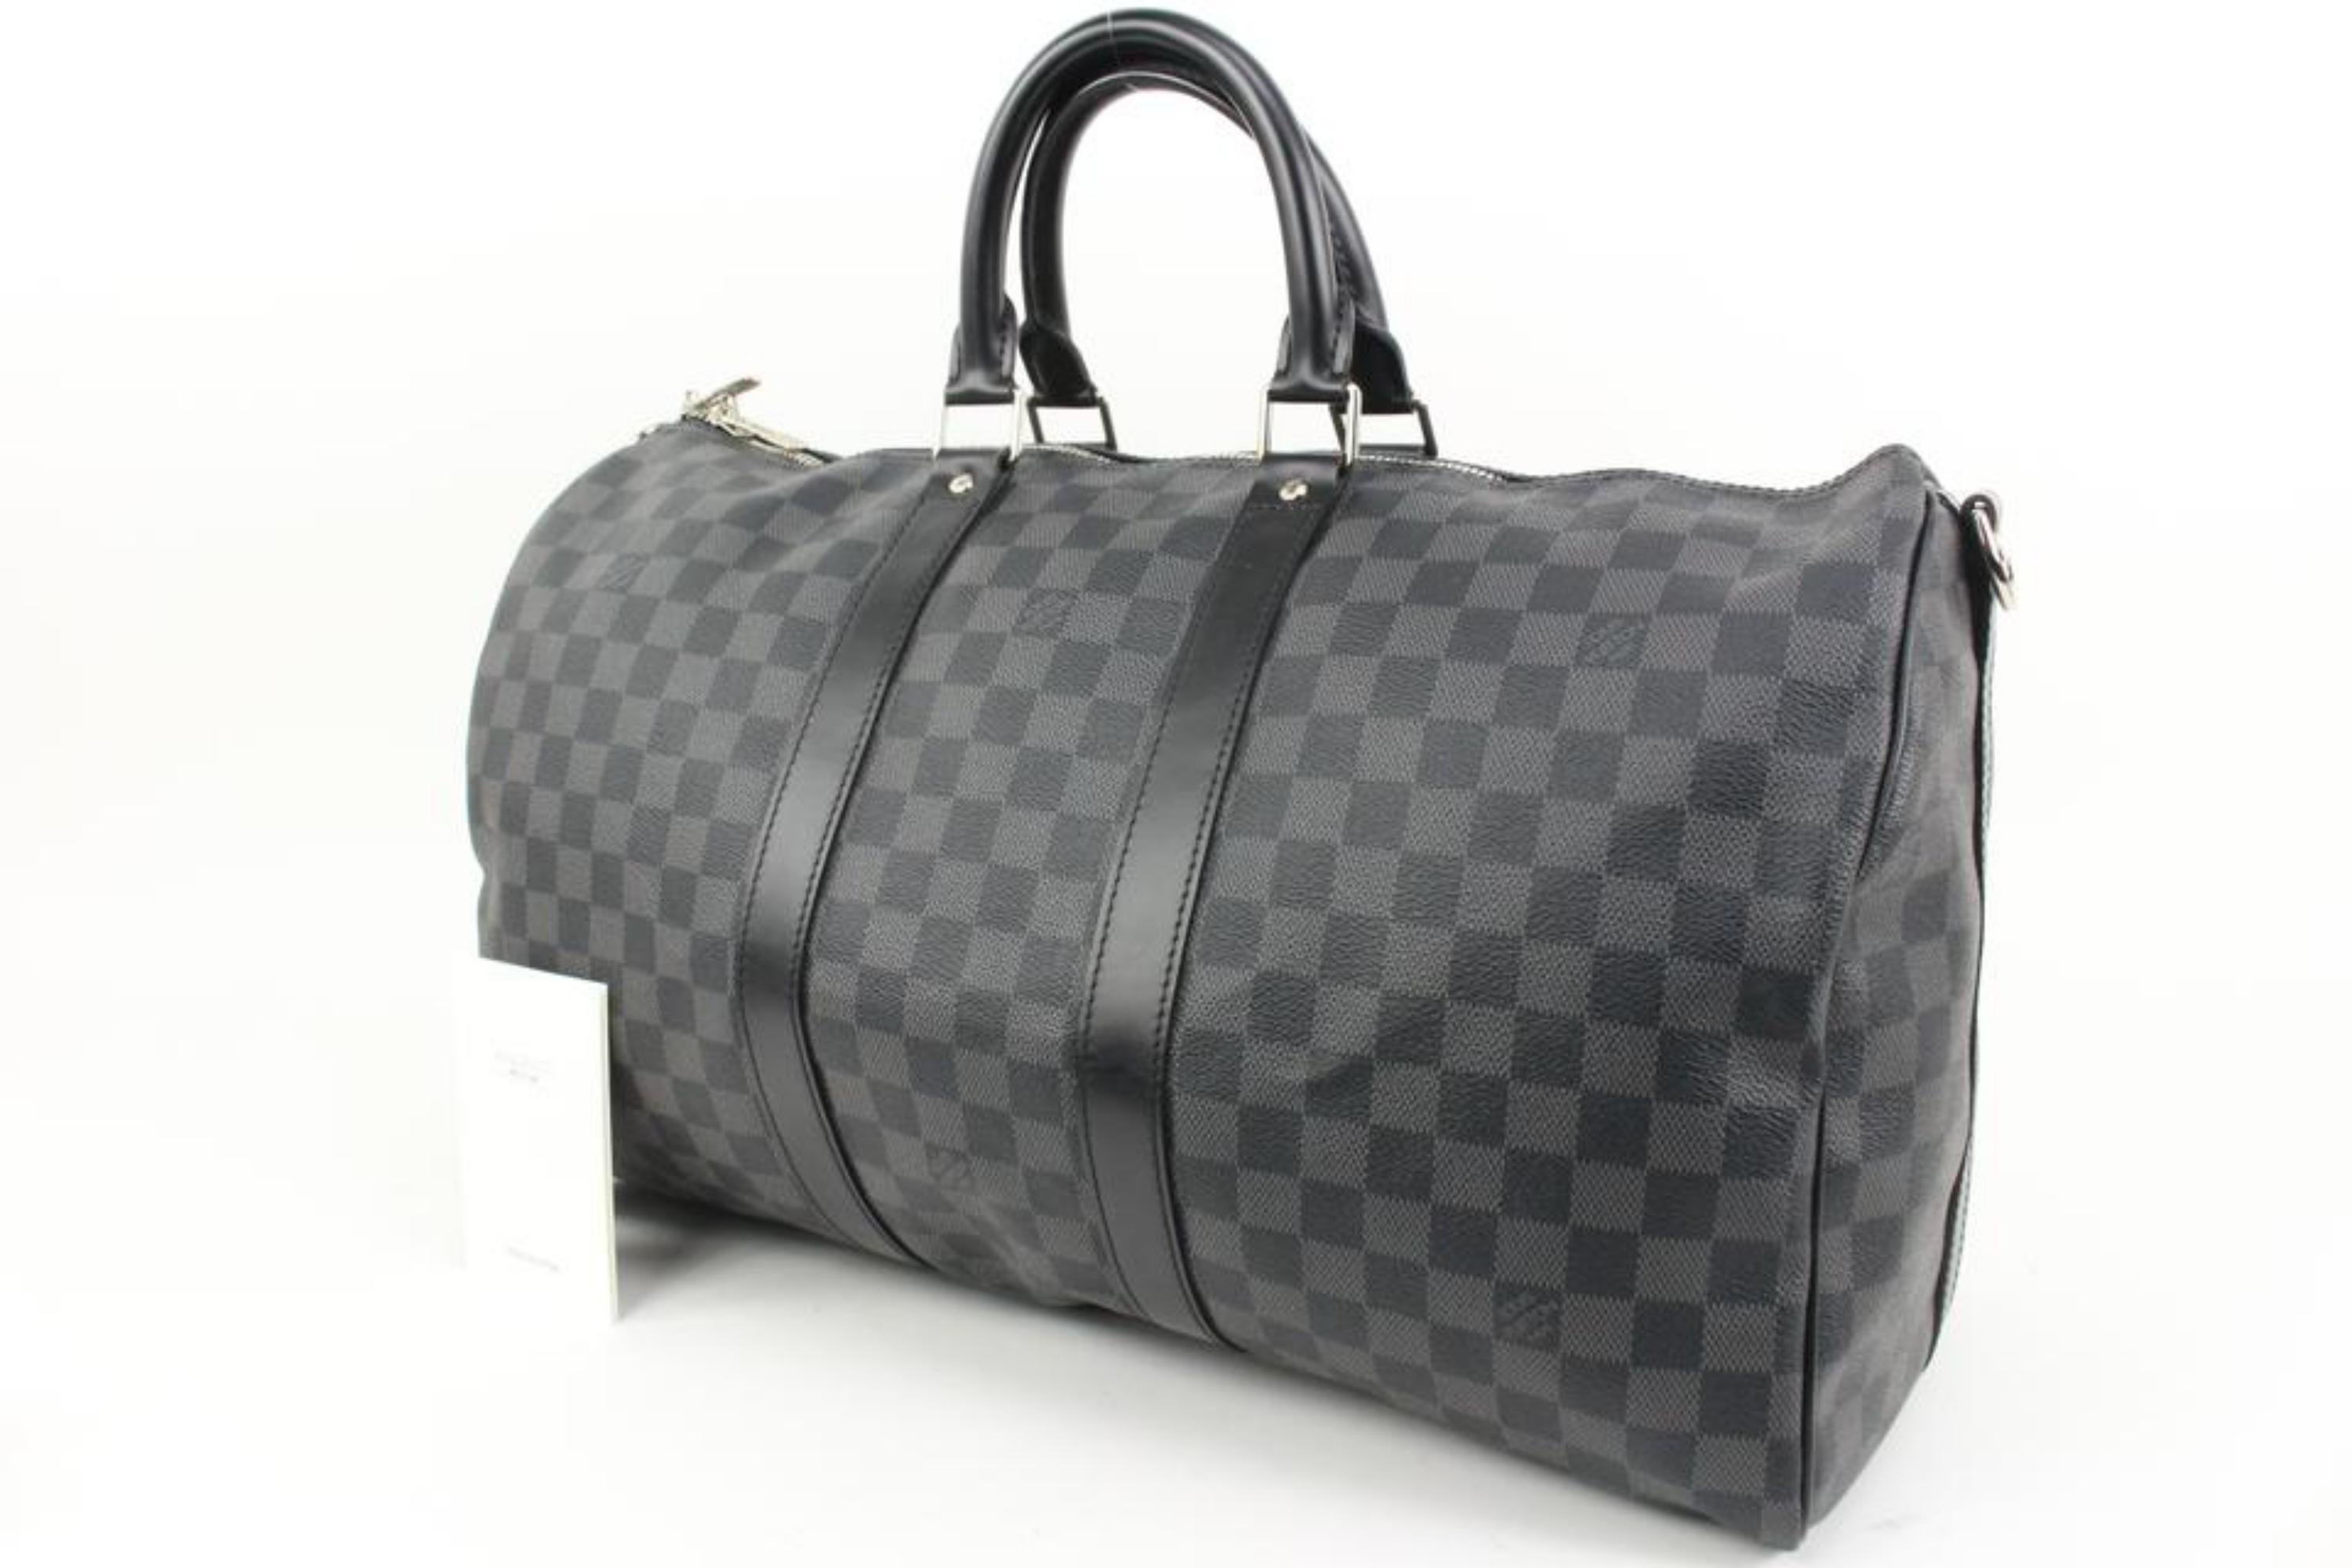 Louis Vuitton Damier Graphite Keepall 45 Duffle Bag 82lk328s
Date Code/Serial Number: MB0152
Made In: France
Measurements: Length:  18